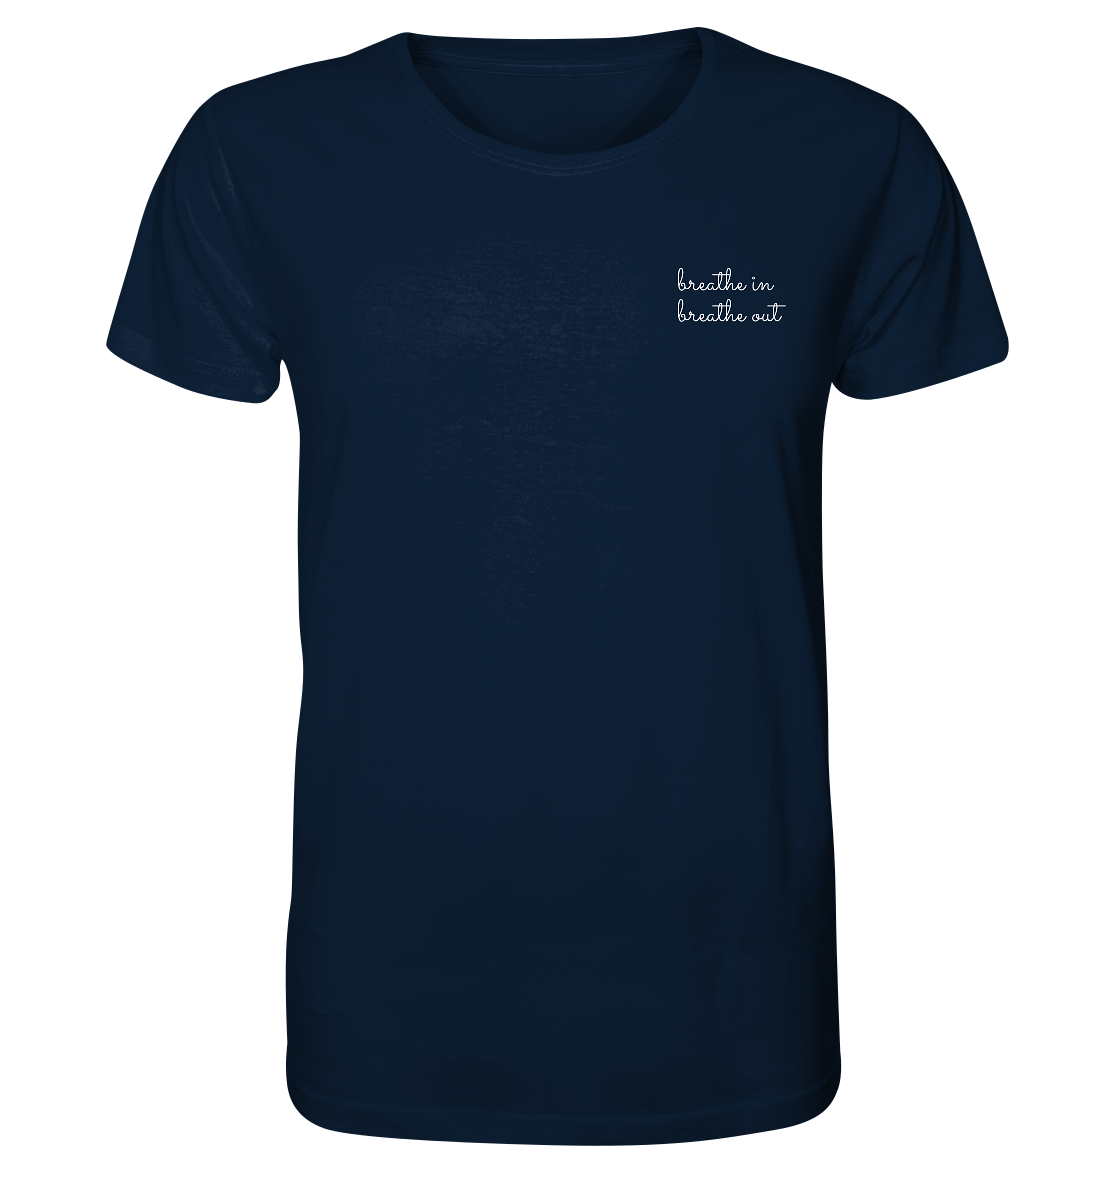 Breathe in breathe out - Organic Shirt